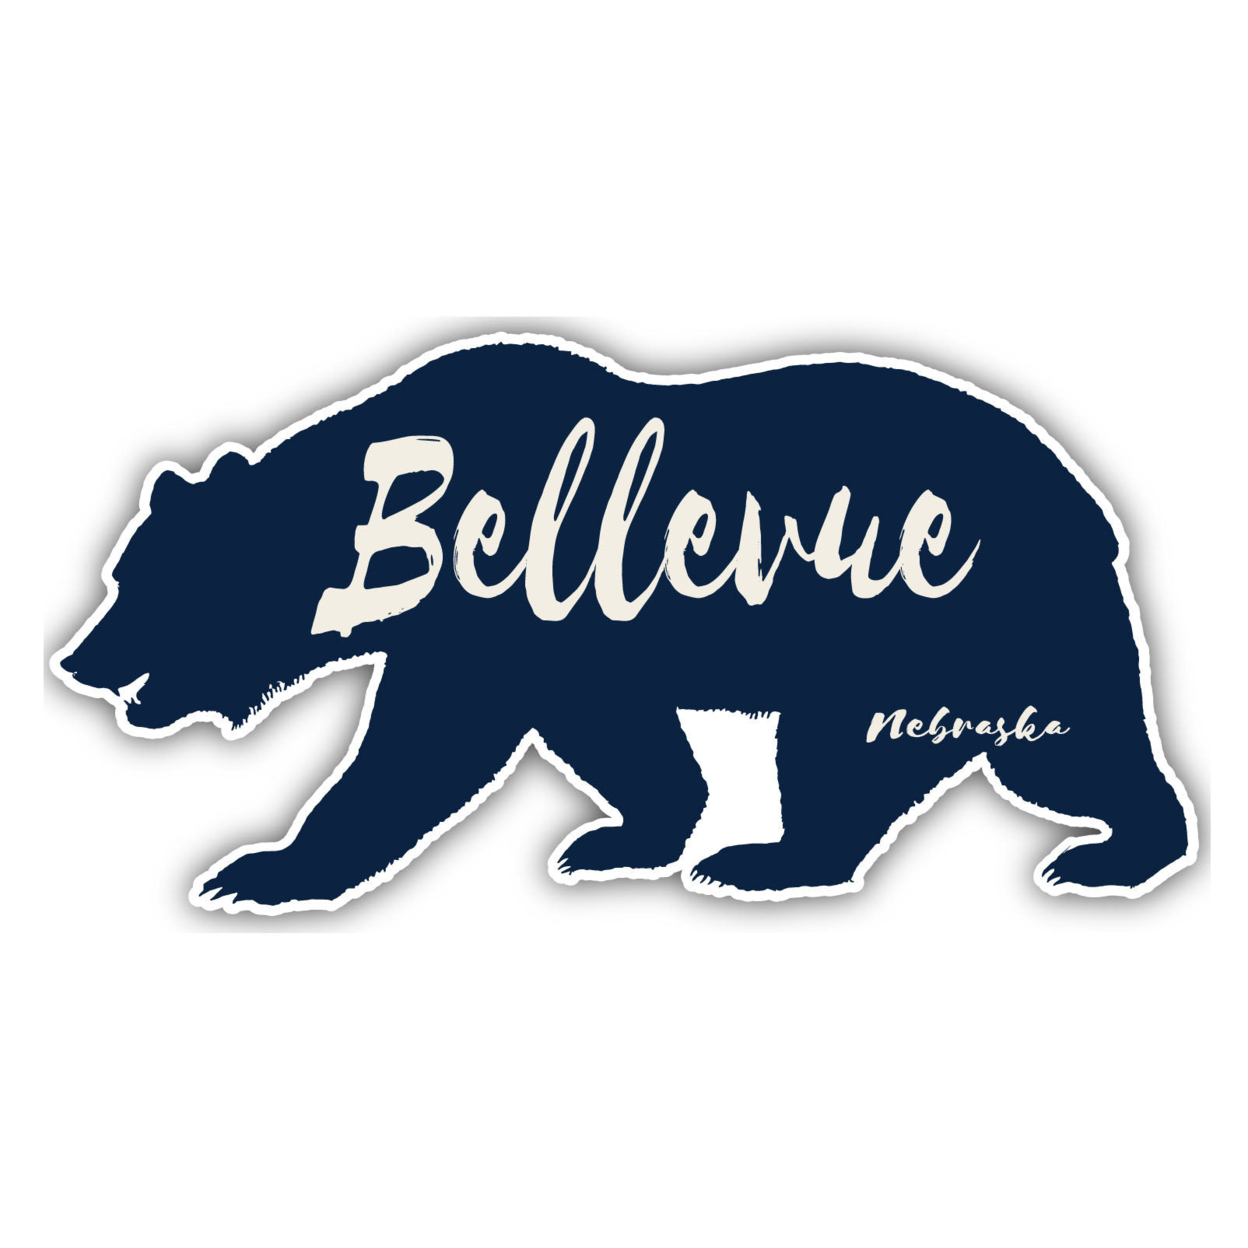 Bellevue Nebraska Souvenir Decorative Stickers (Choose Theme And Size) - 4-Pack, 4-Inch, Great Outdoors